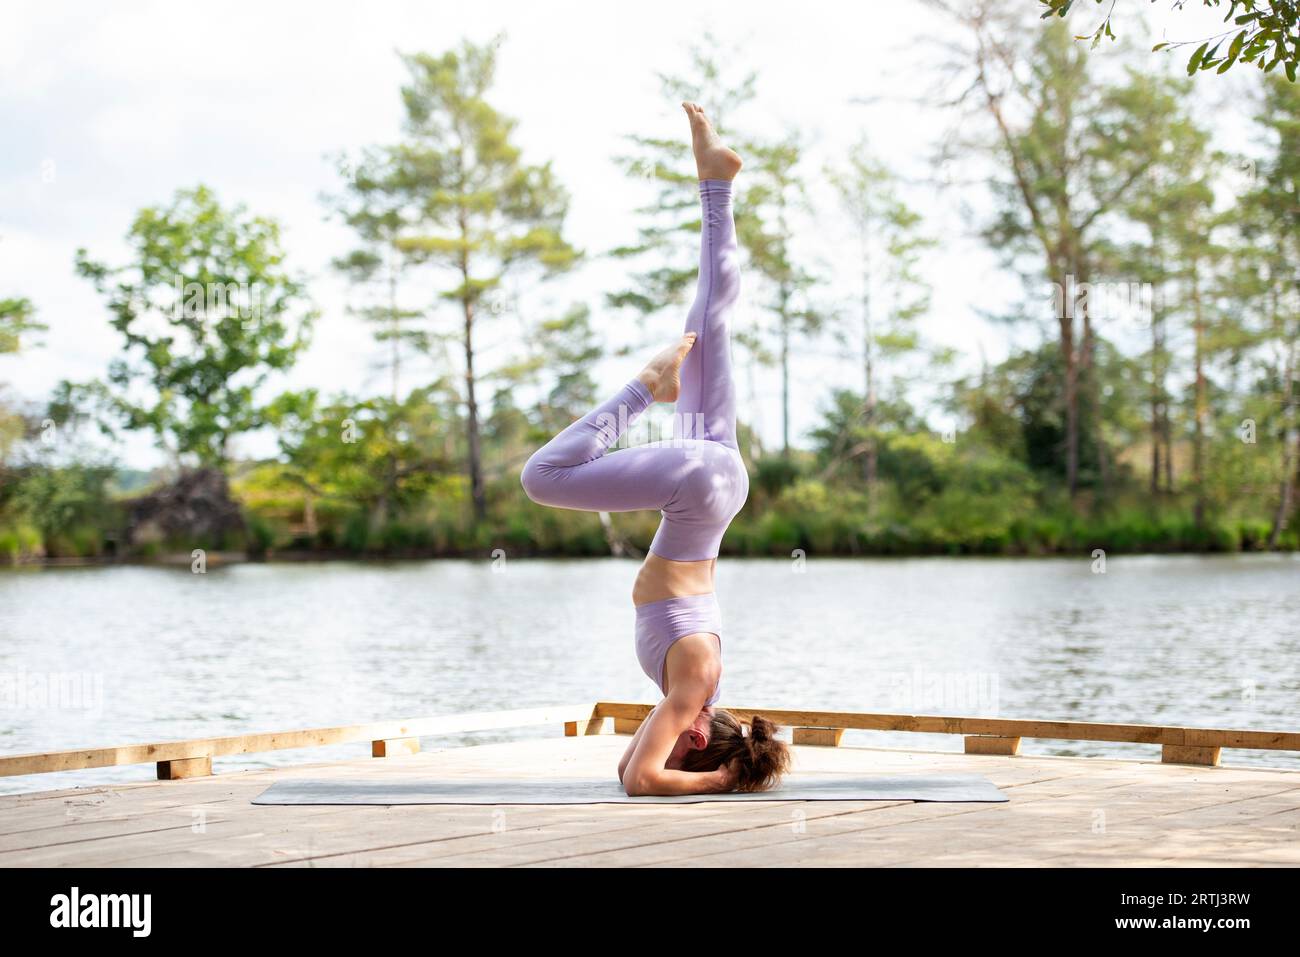 Sporty woman practicing yoga on a jetty by a lake, doing a headstand, part of series. Stock Photo